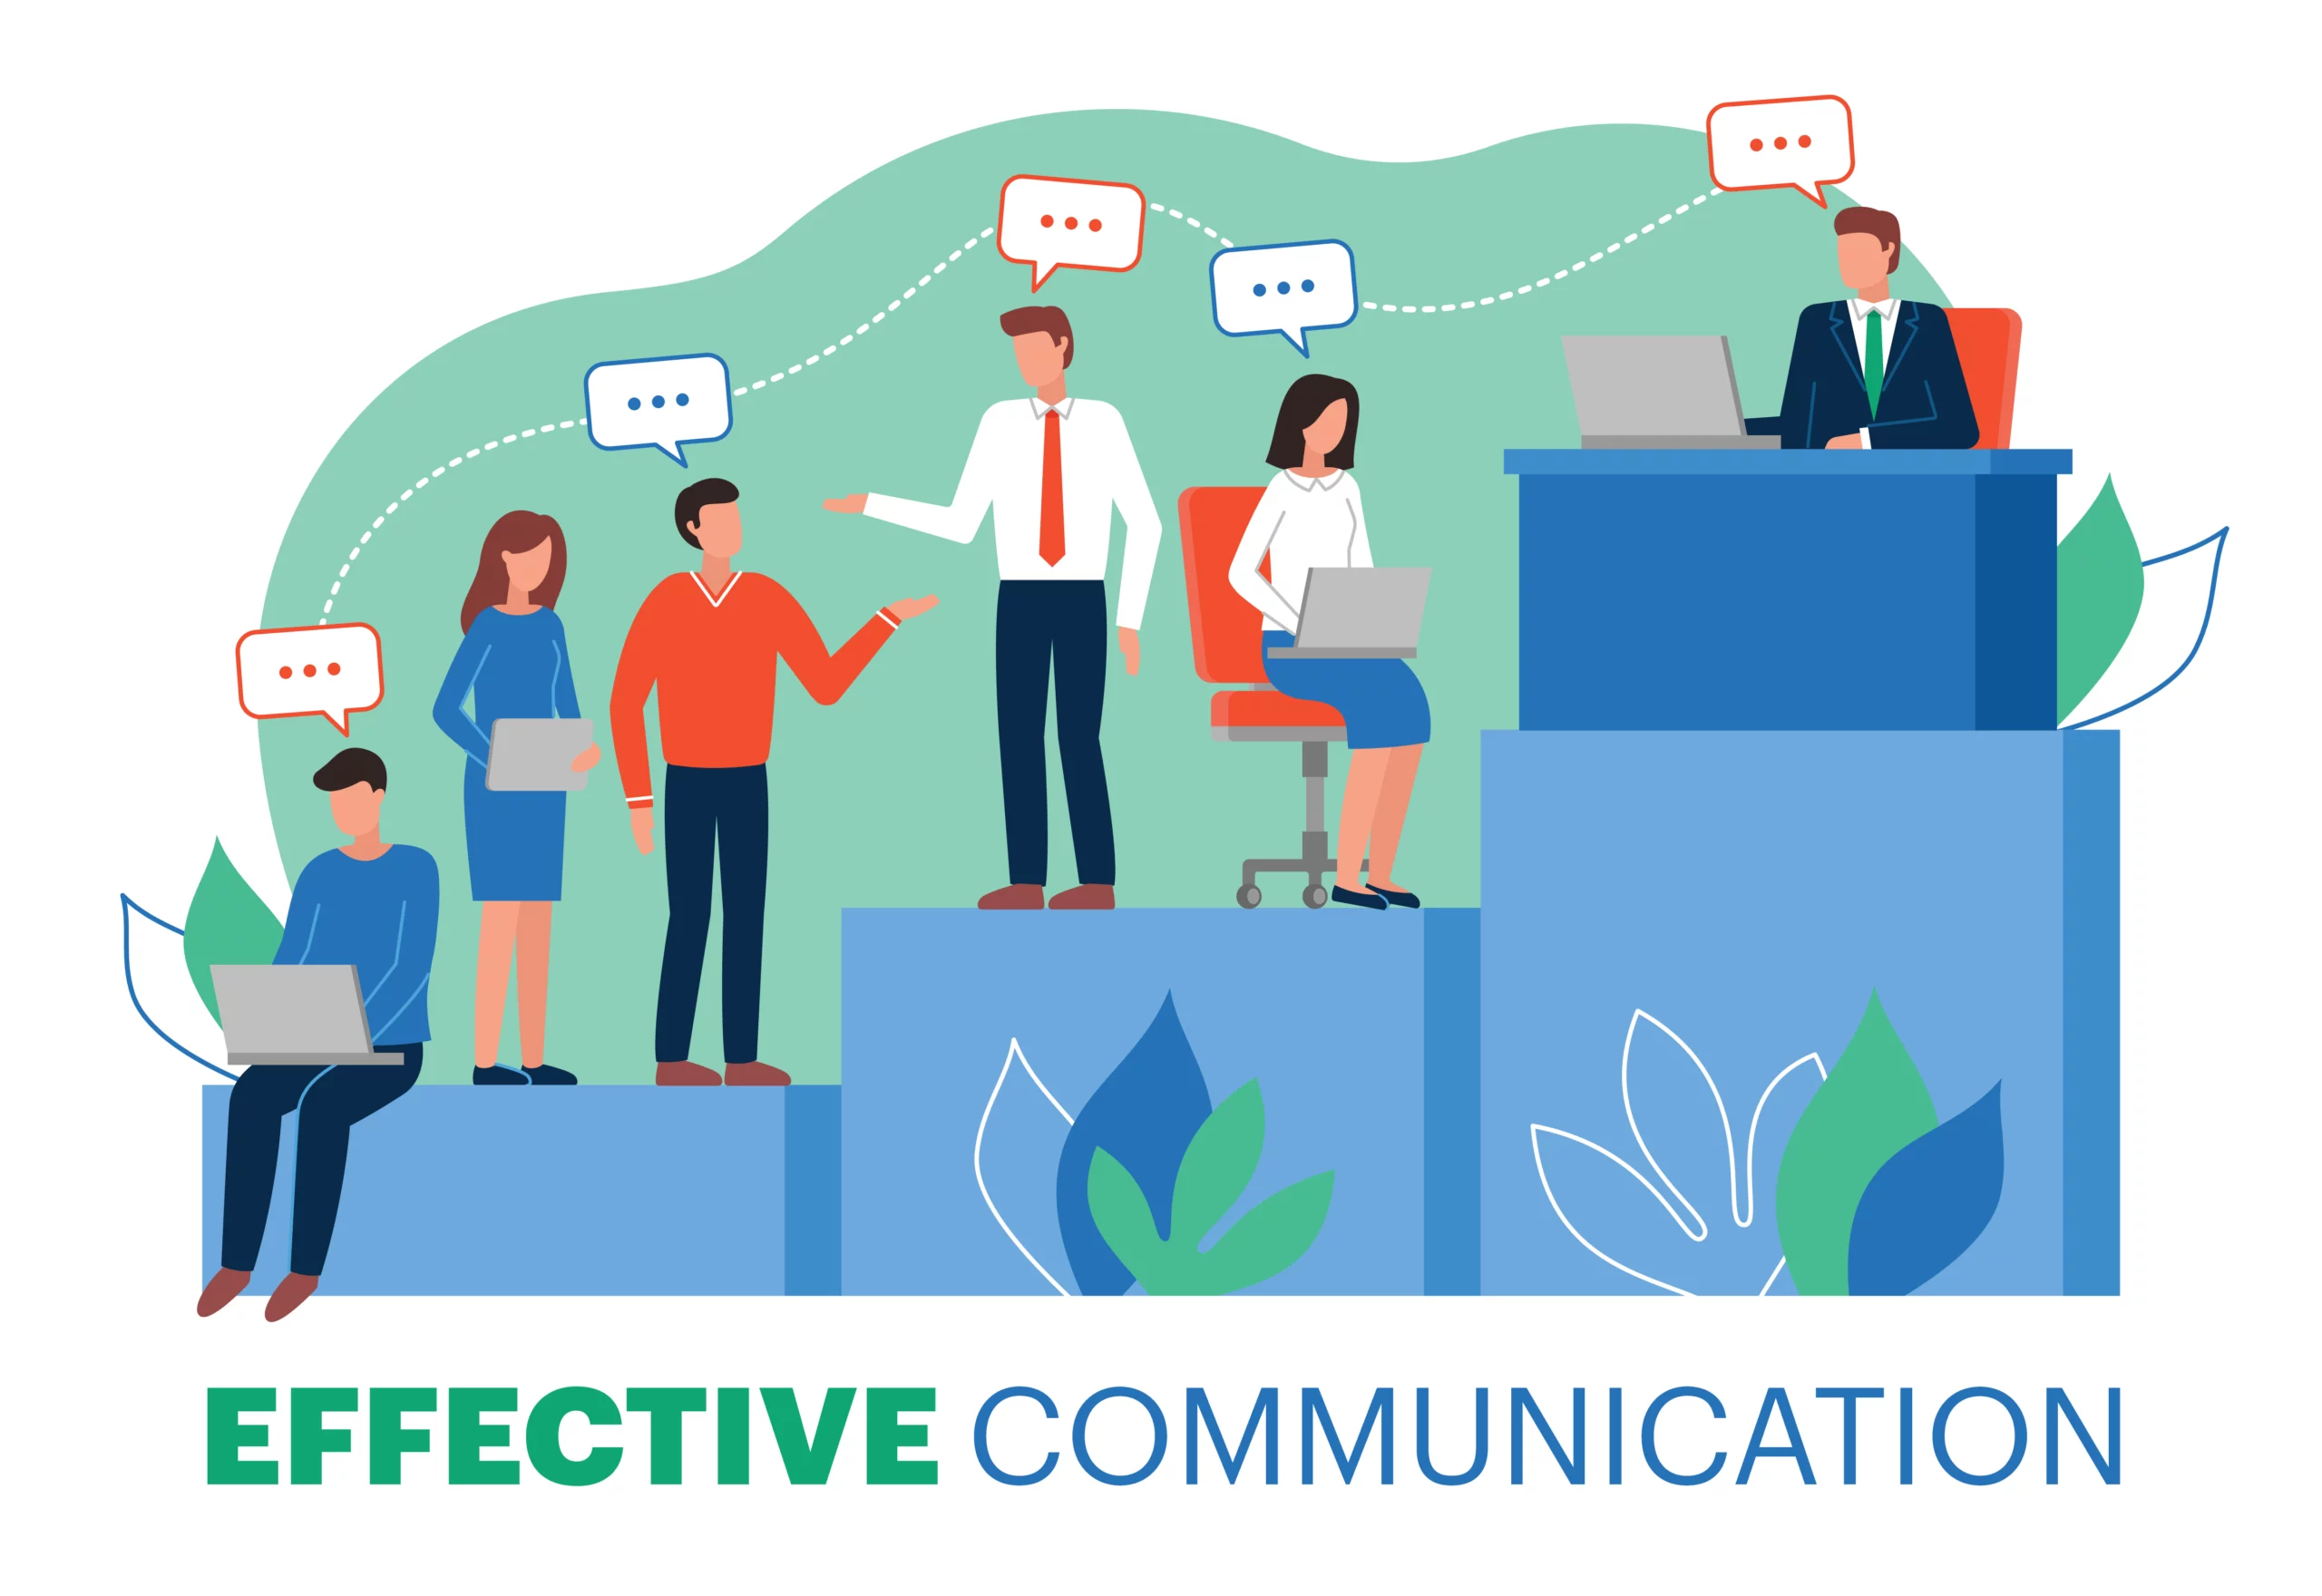 This colorful illustration shows effective vertical communication within a real estate team